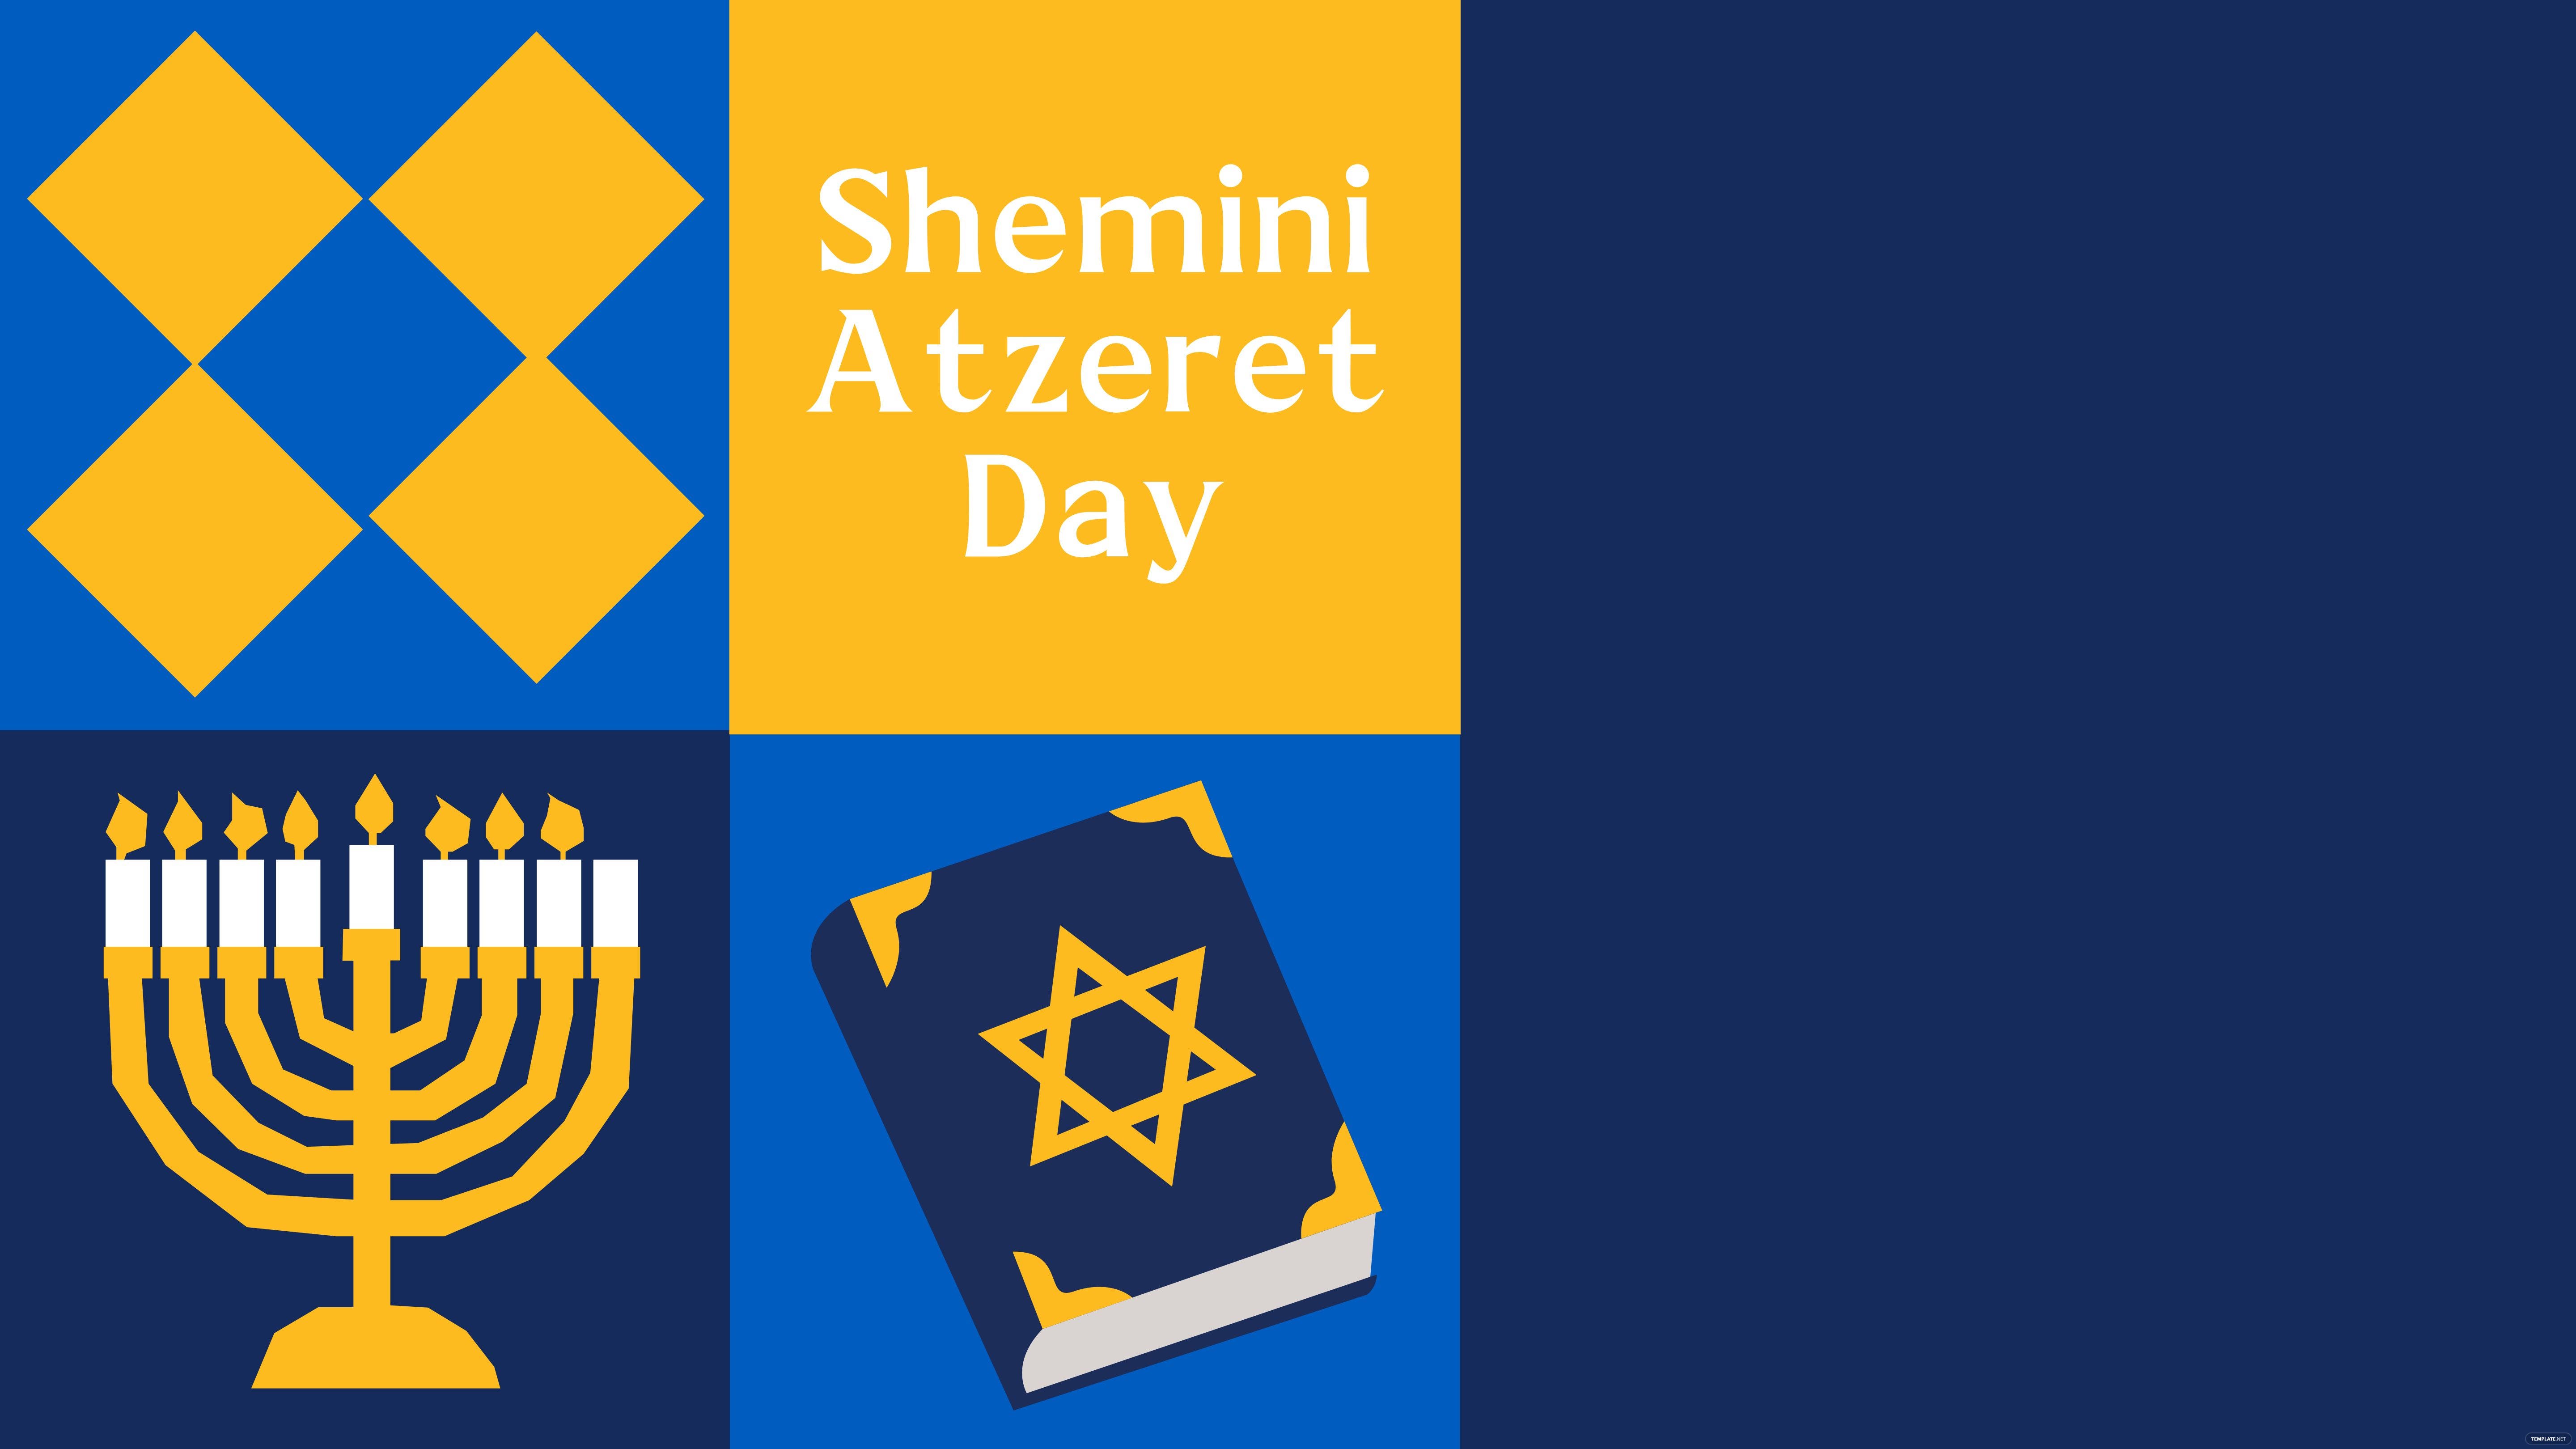 shemini atzeret day background ideas and examples